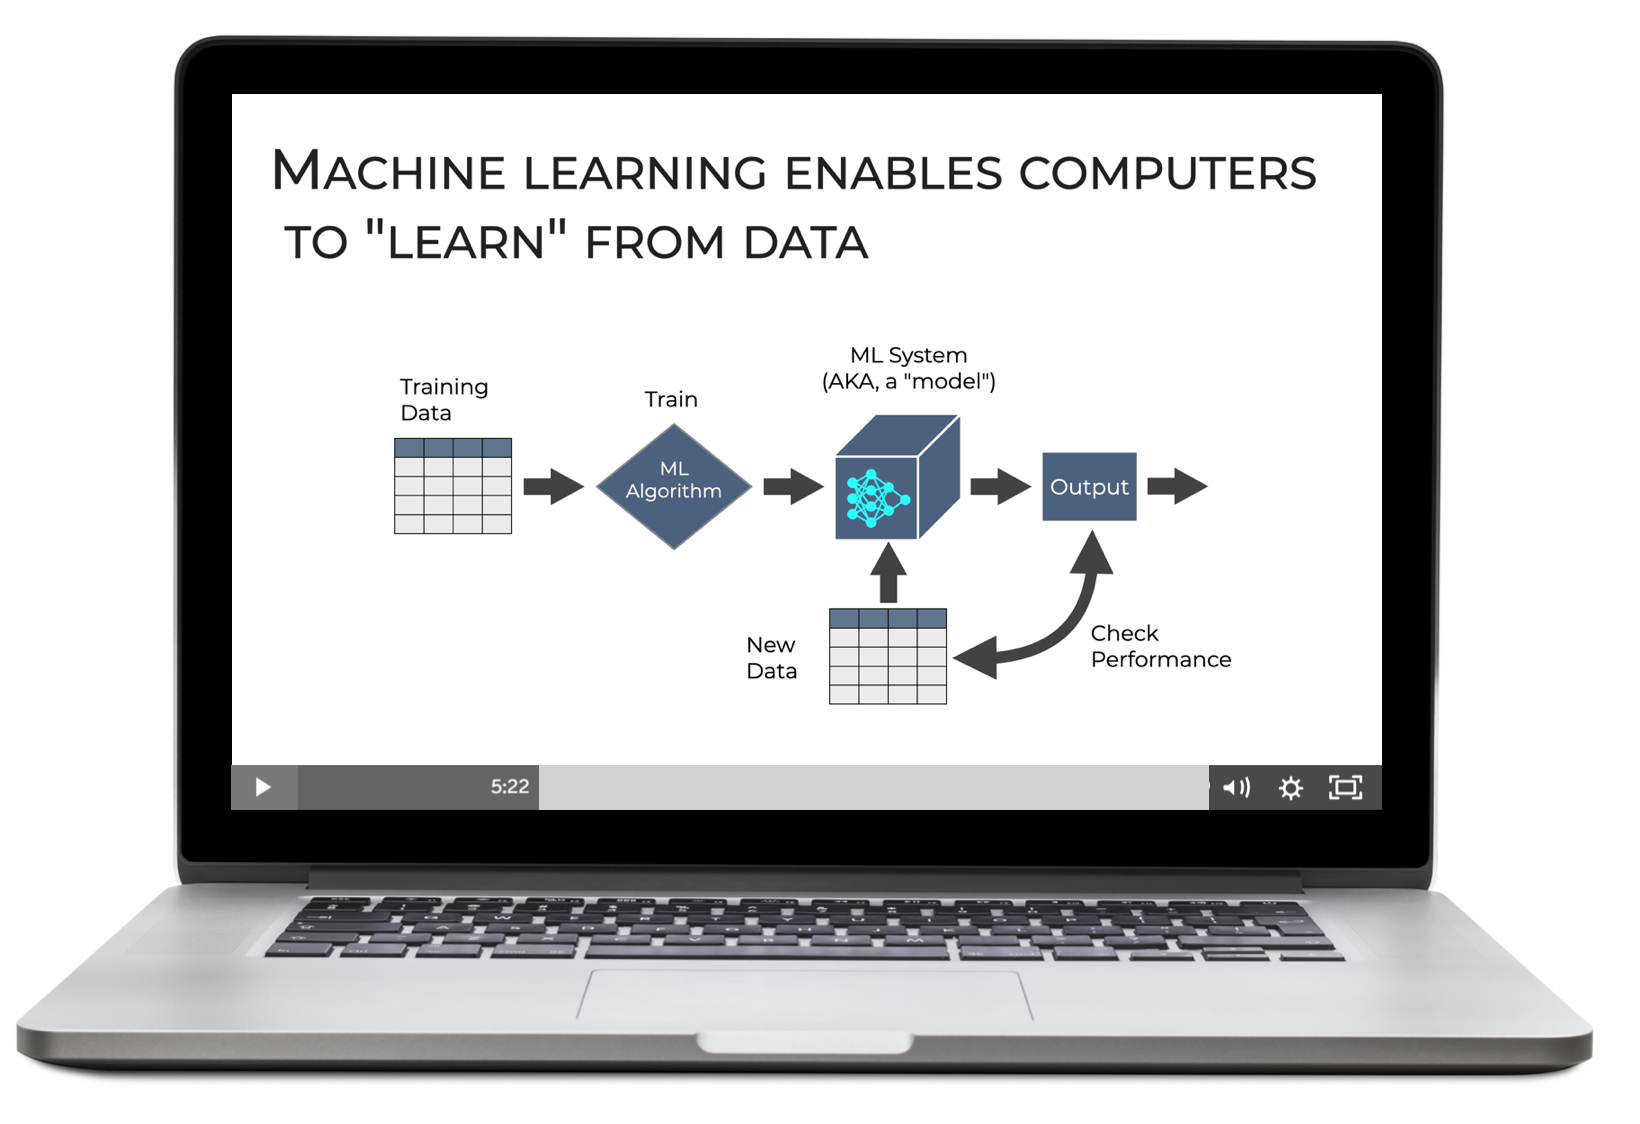 An image of a presentation, explaining the high-level machine learning process.